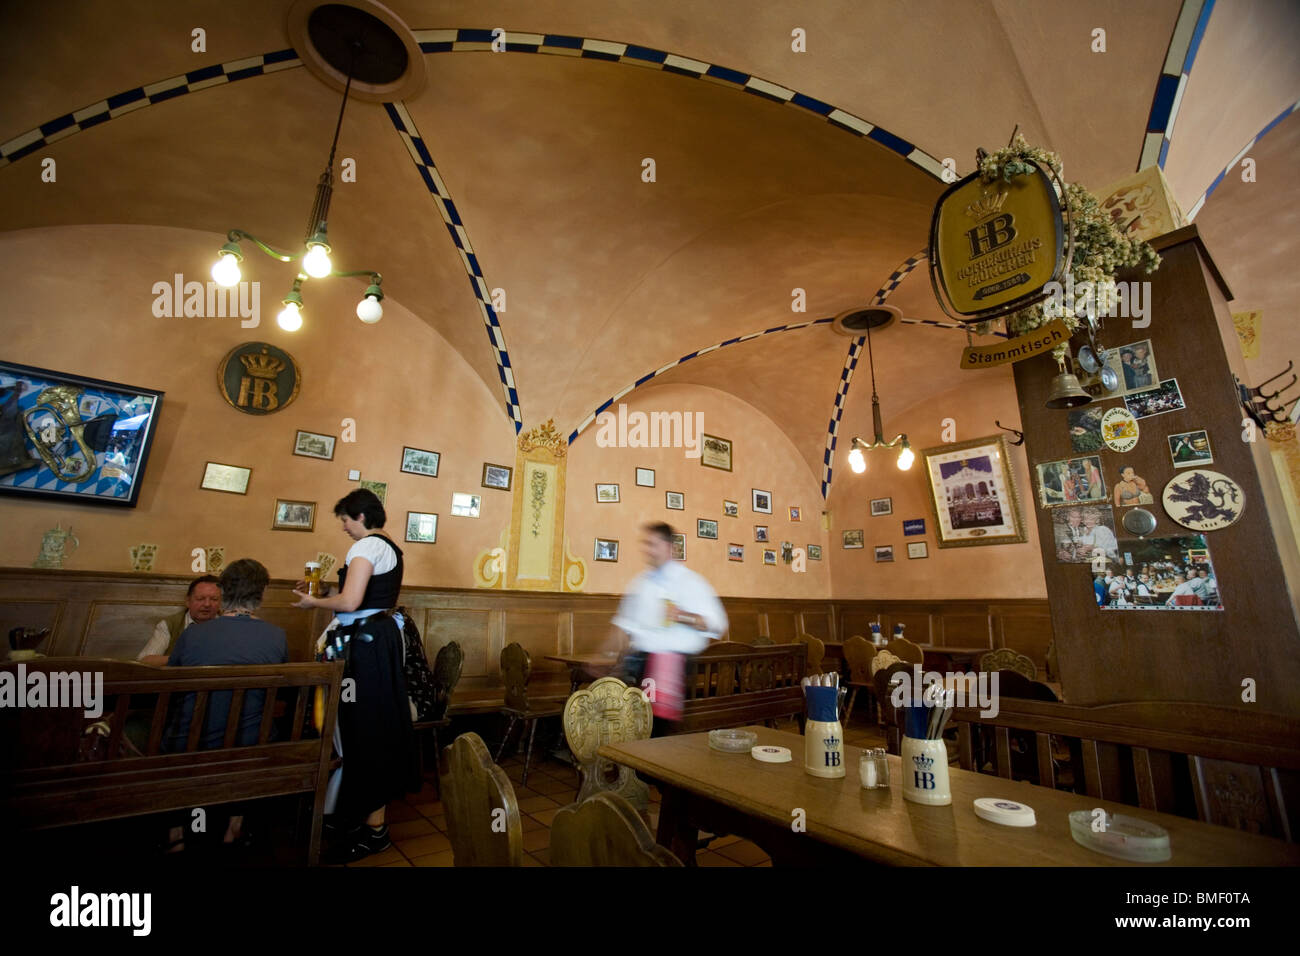 Interior of the Hofbraukeller, a traditional bavarian restaurant in a cellar with a beer garden. Munich, Germany Stock Photo